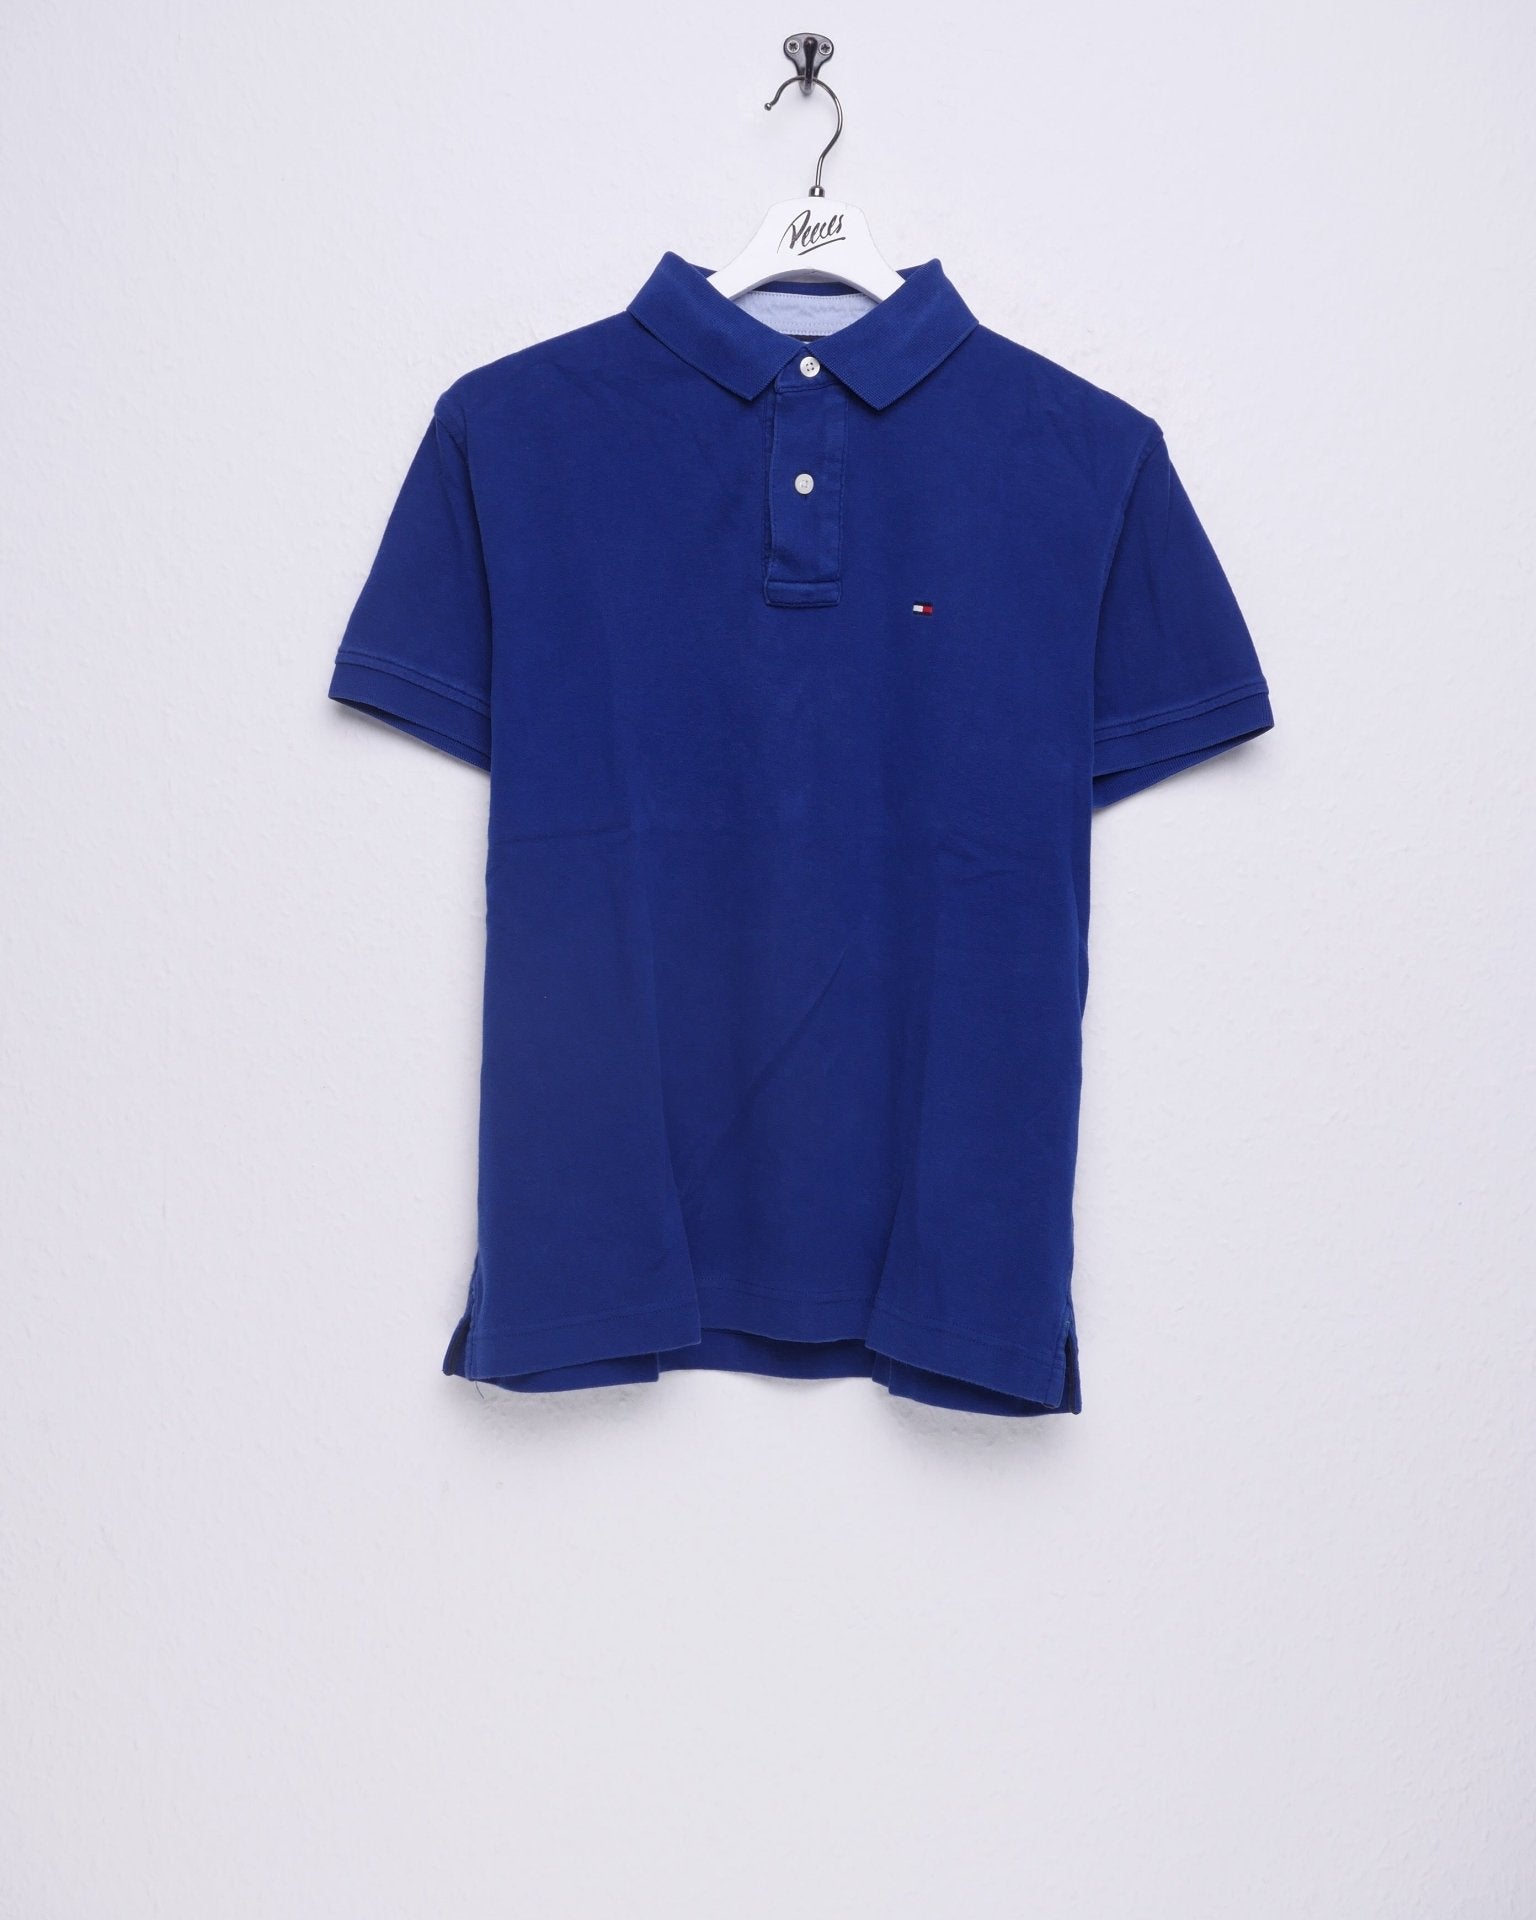 Tommy Hilfiger embroidered Logo blue S/S Polo Shirt - Peeces